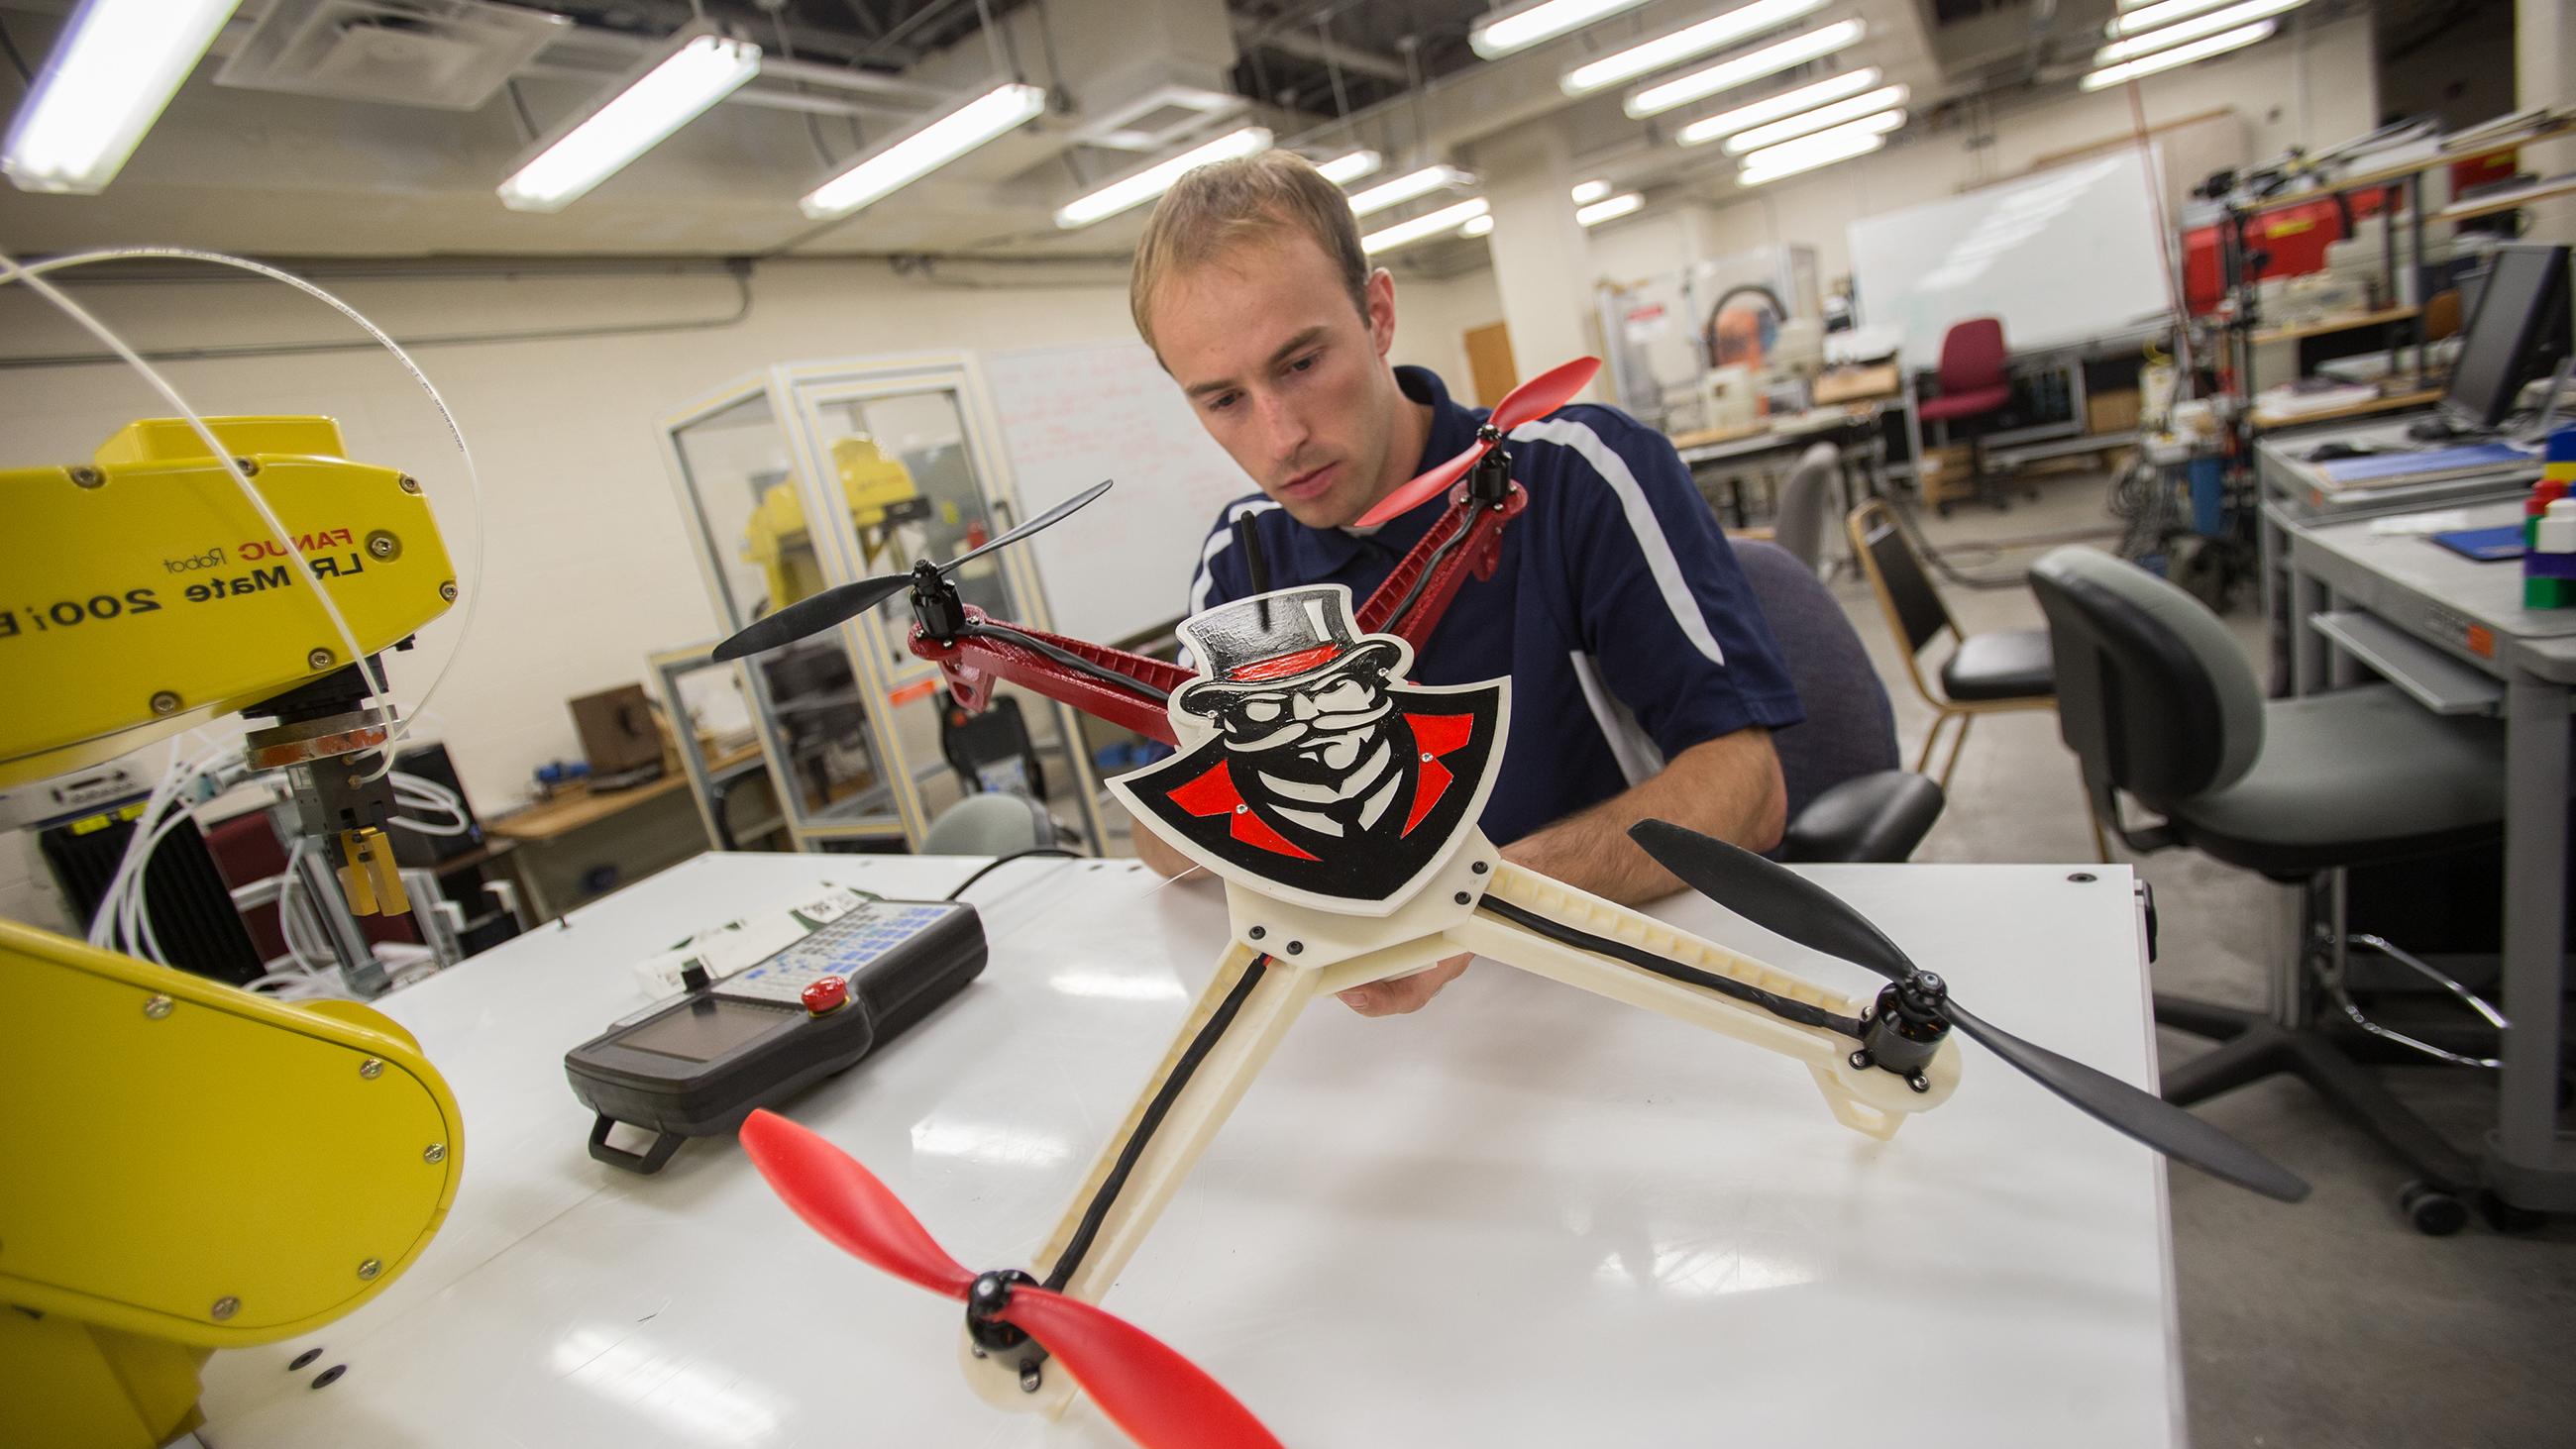 Student building drone